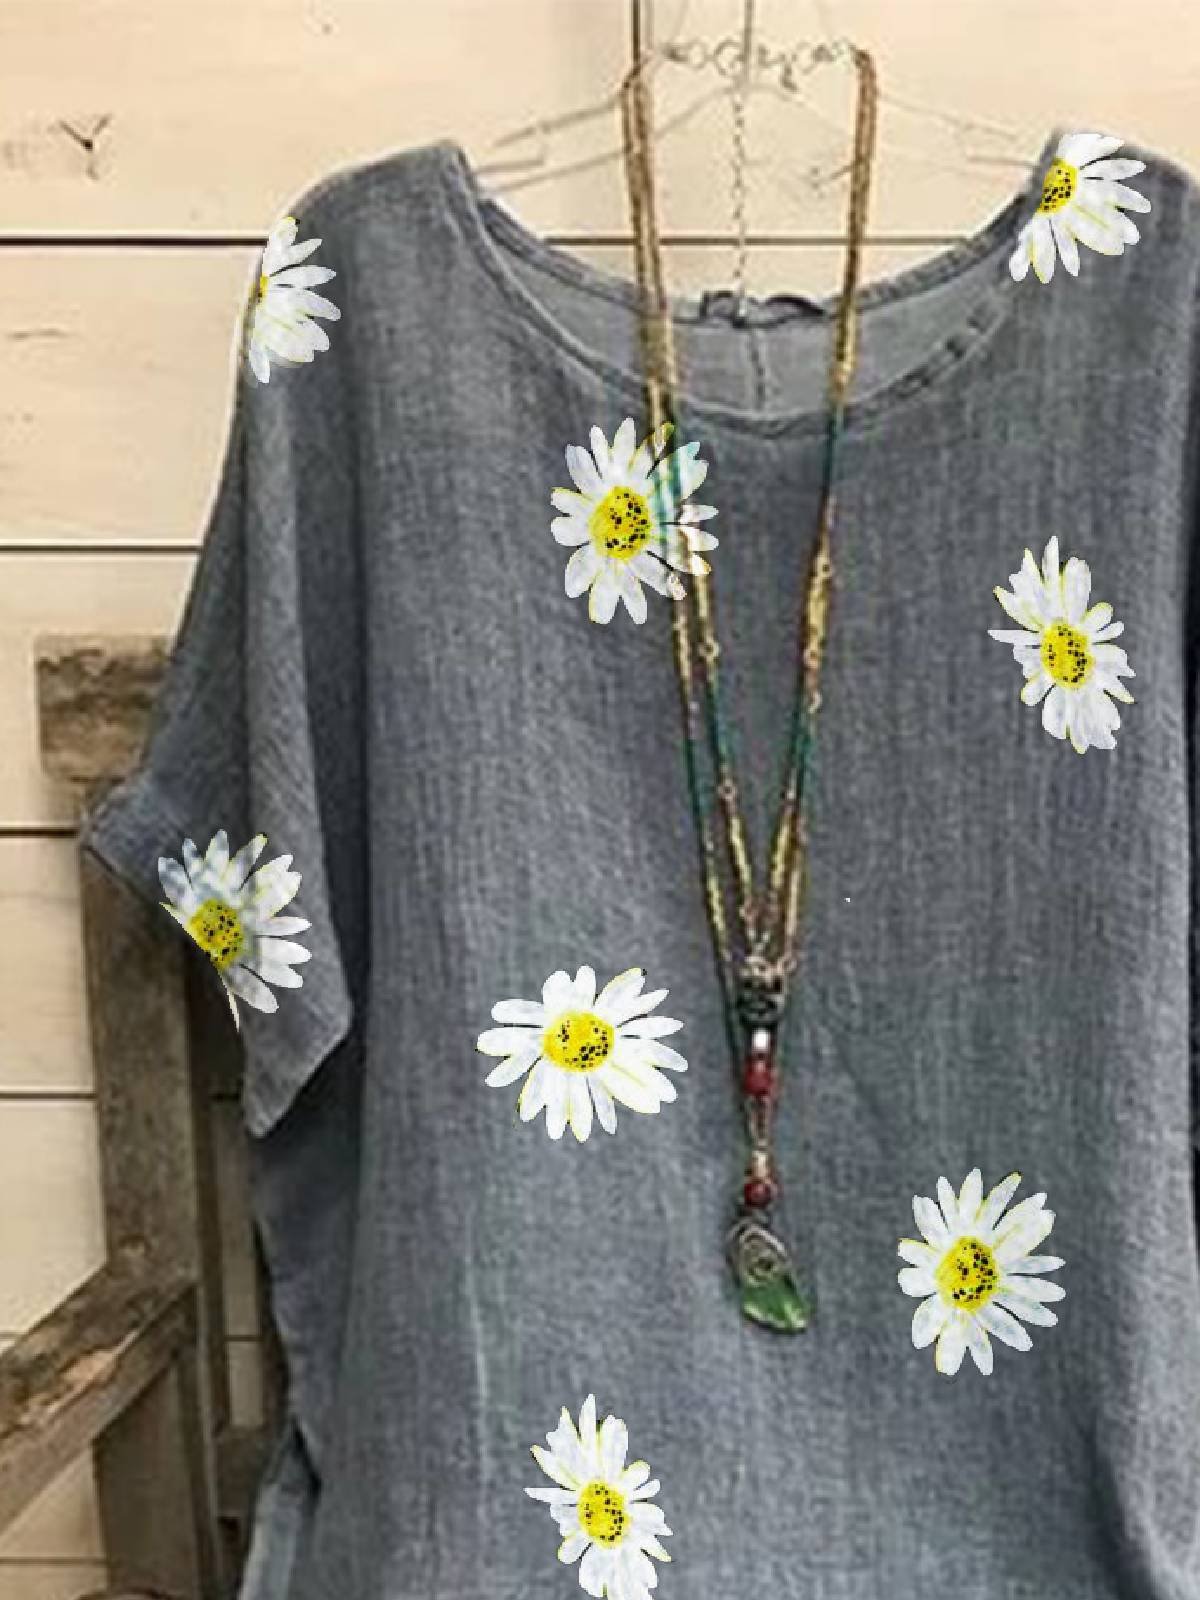 Floral Printed Casual Crew Neck Cotton-Blend Tops